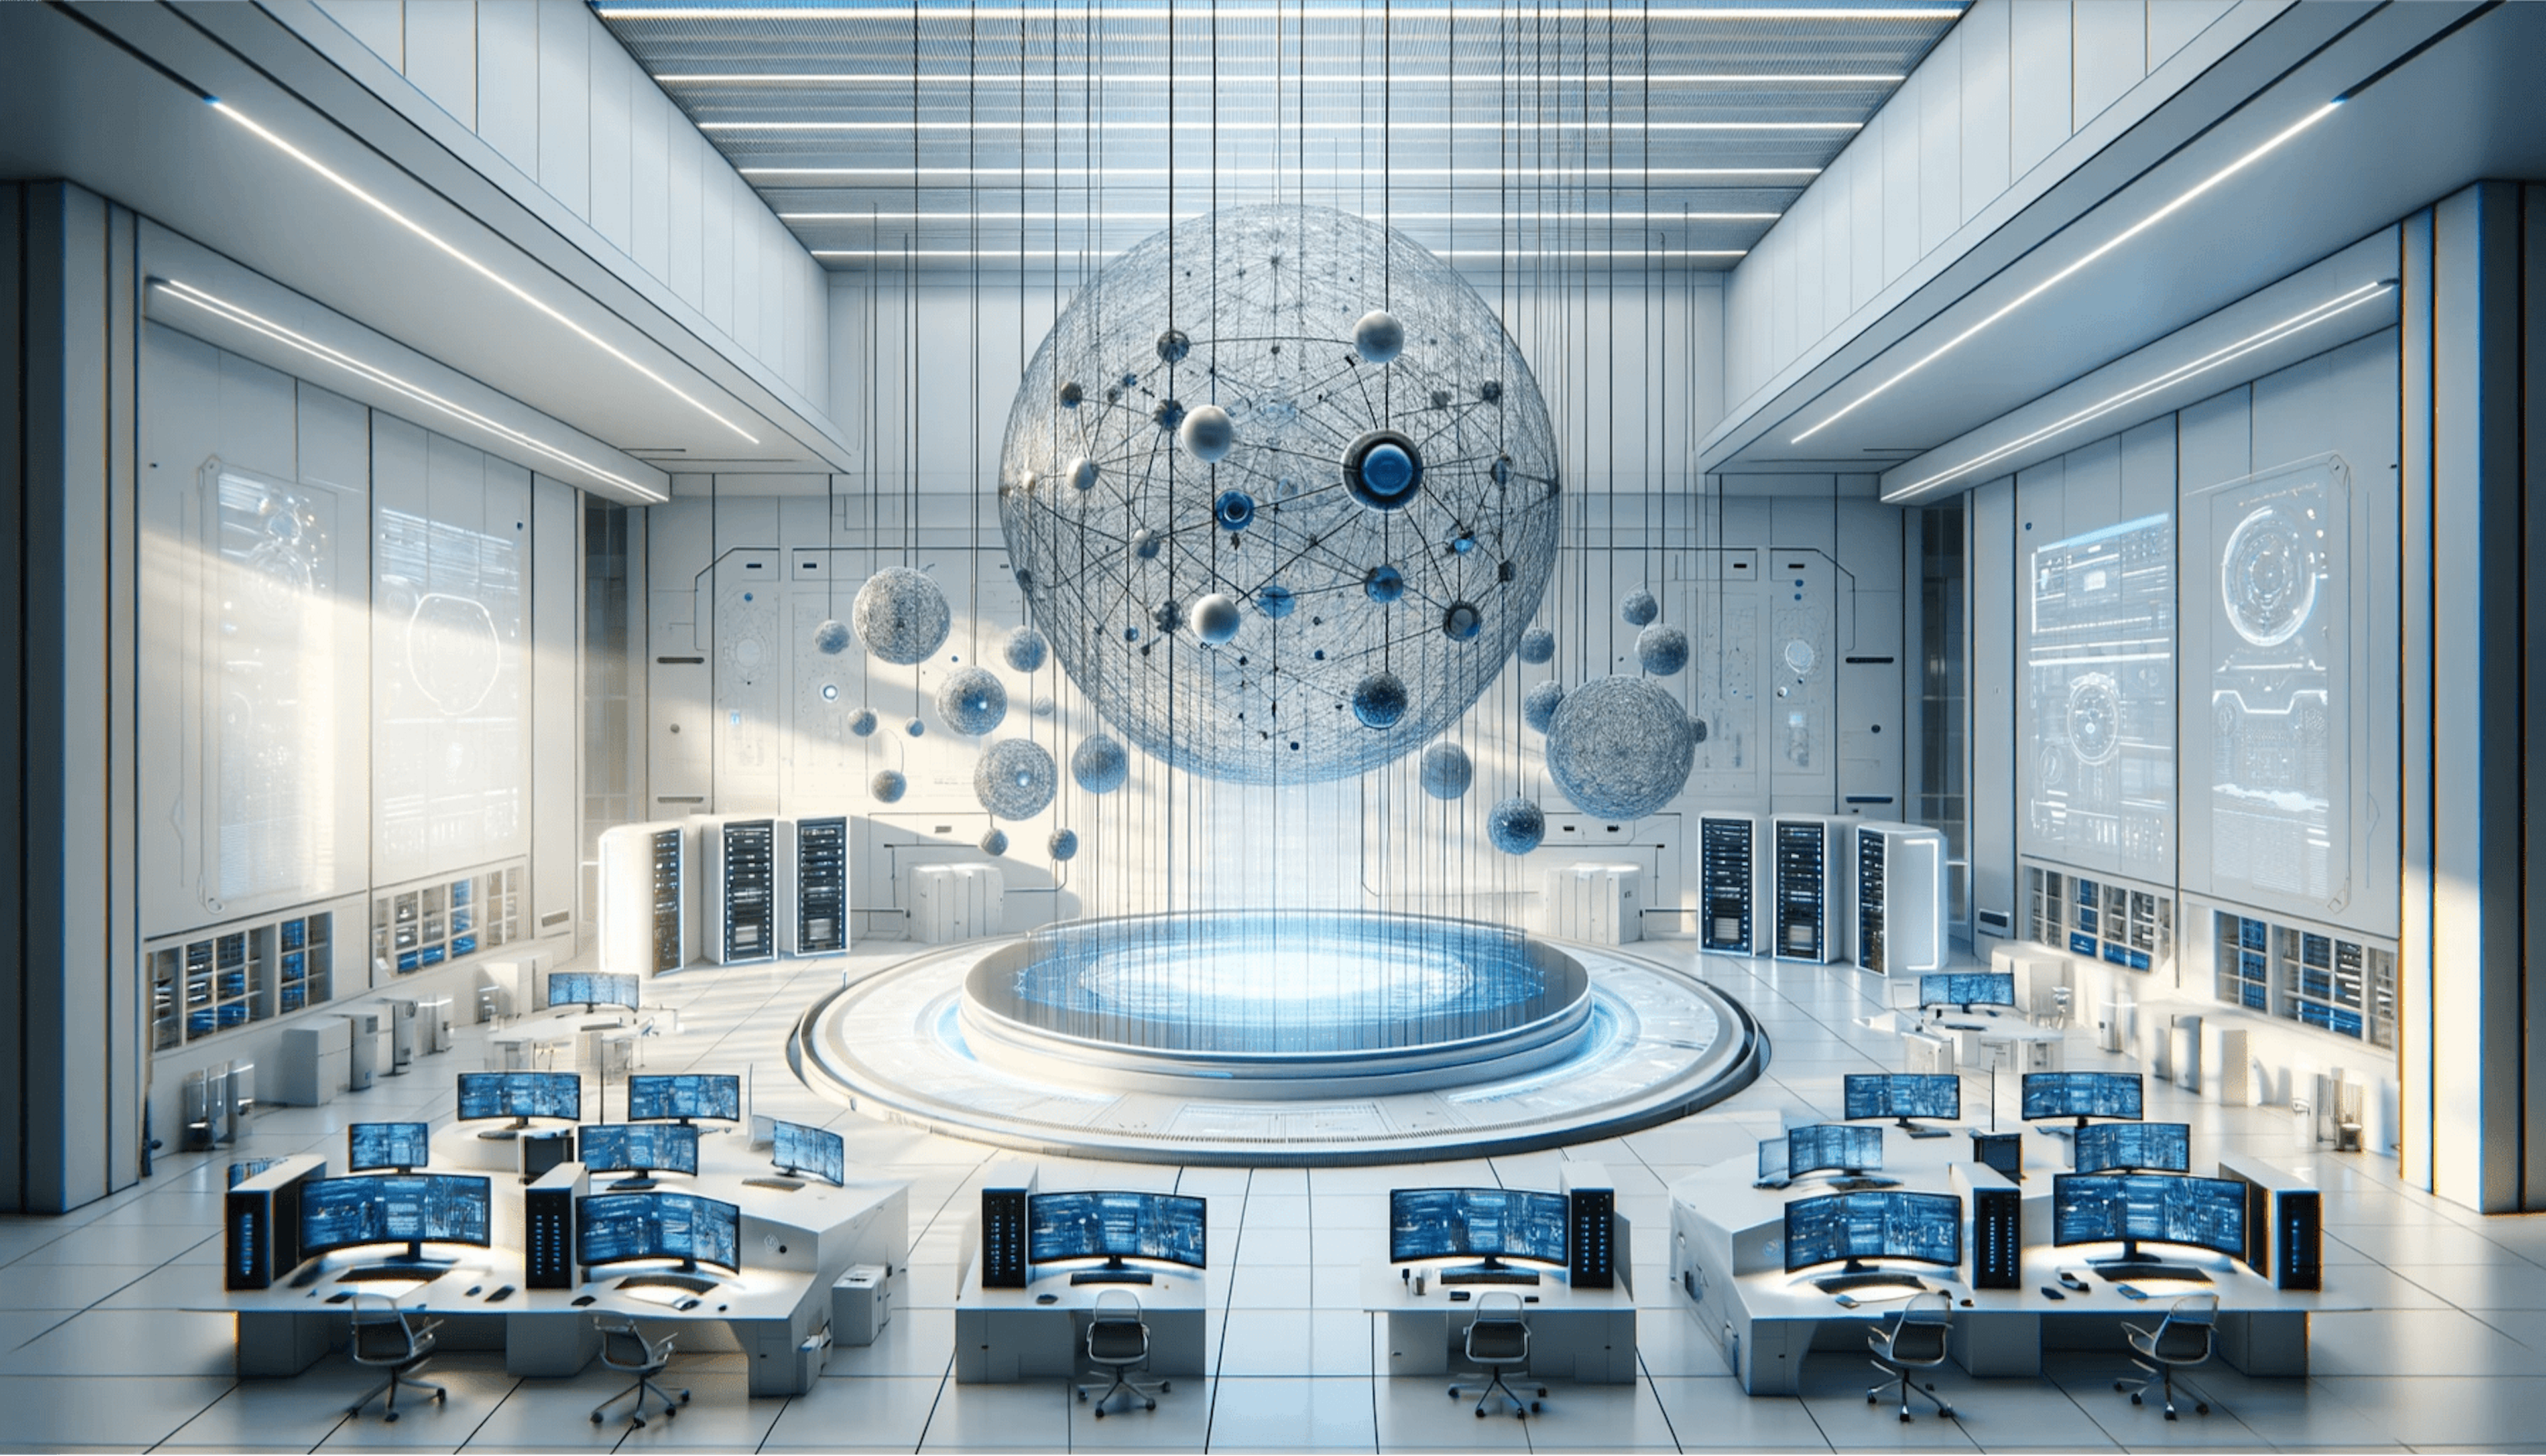 A high-tech R&D lab with workstations and a large spherical network structure above a central platform.